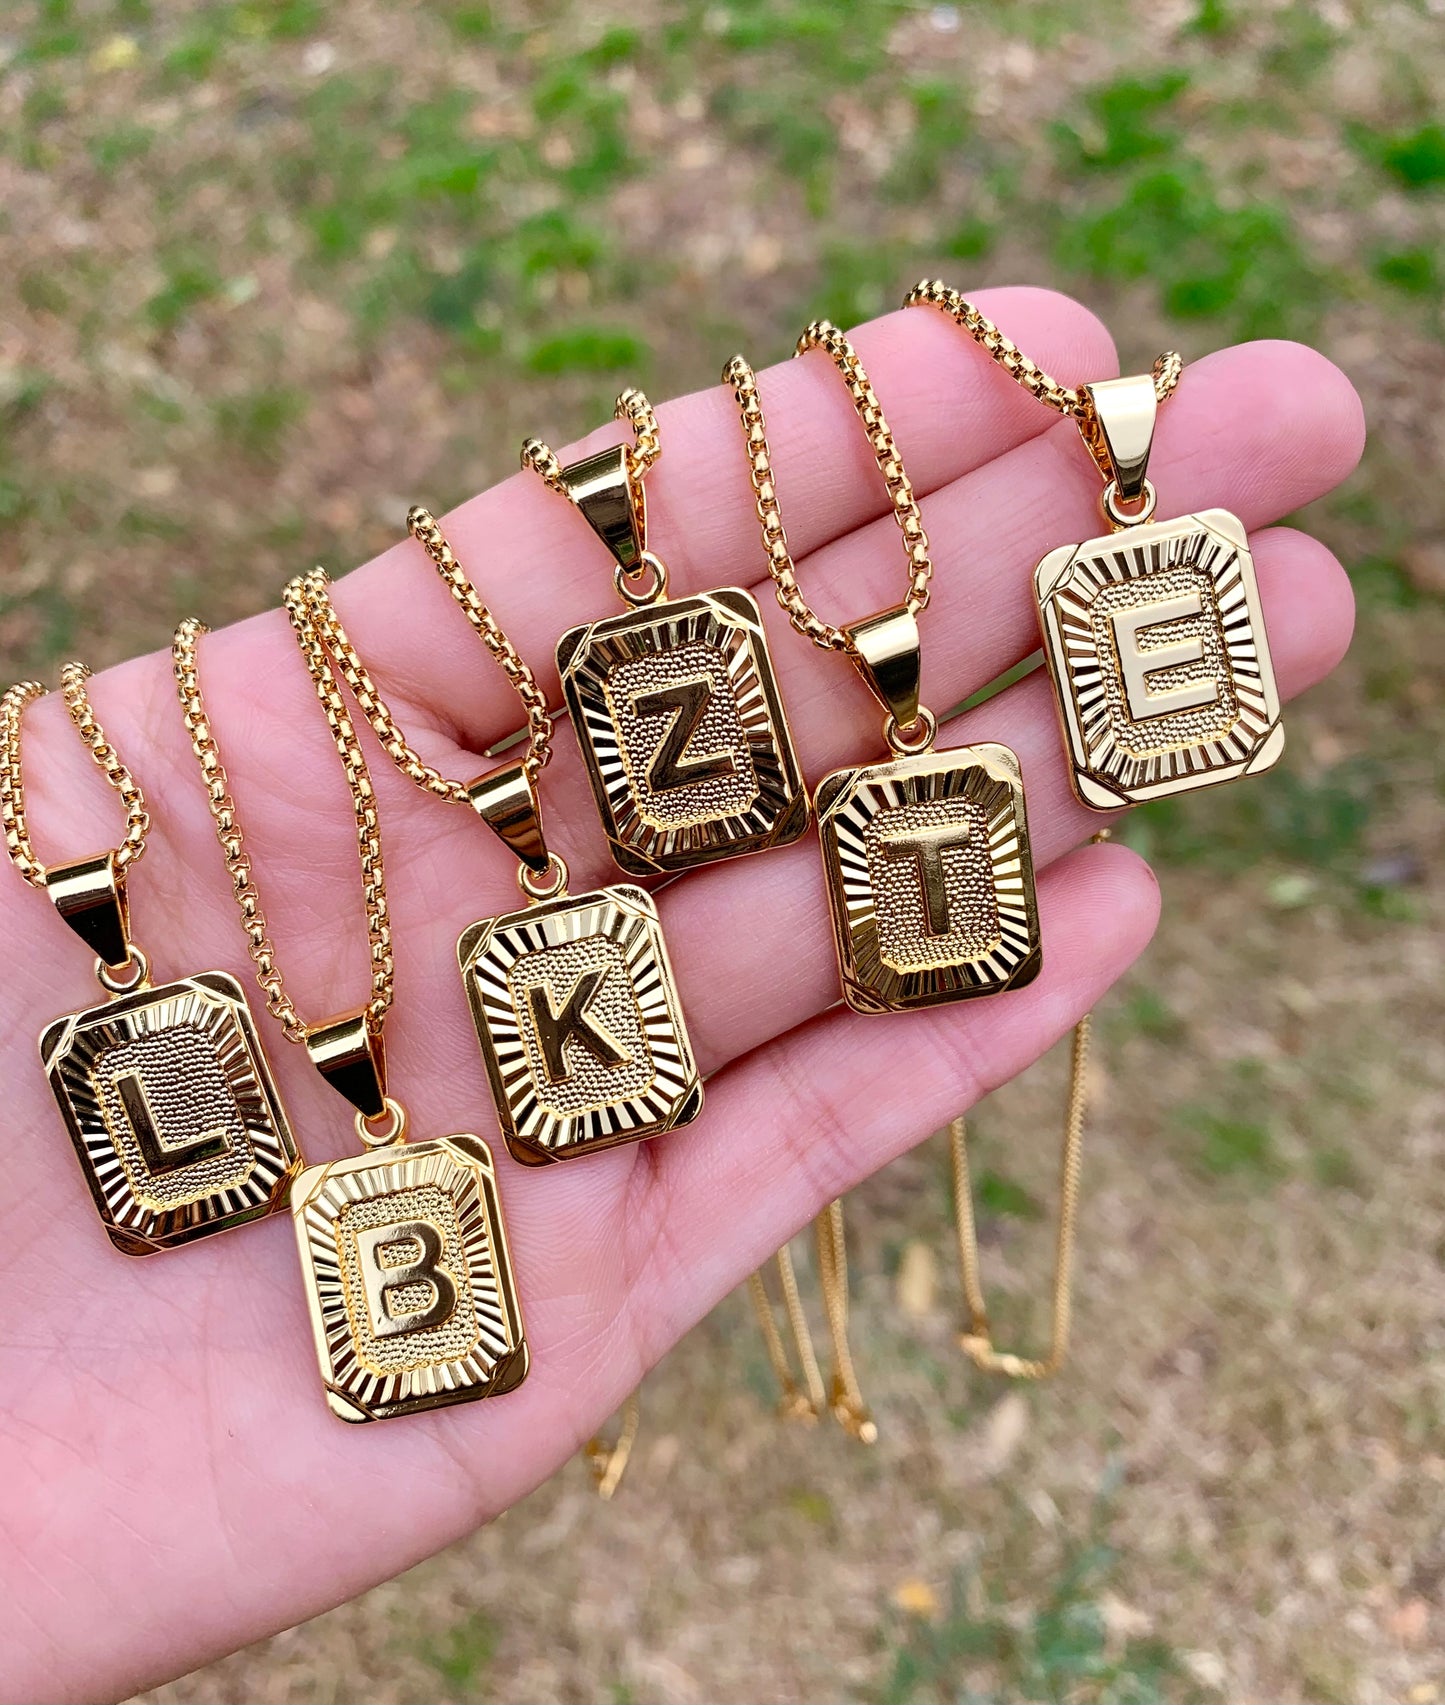 "Put My Name On It" necklace